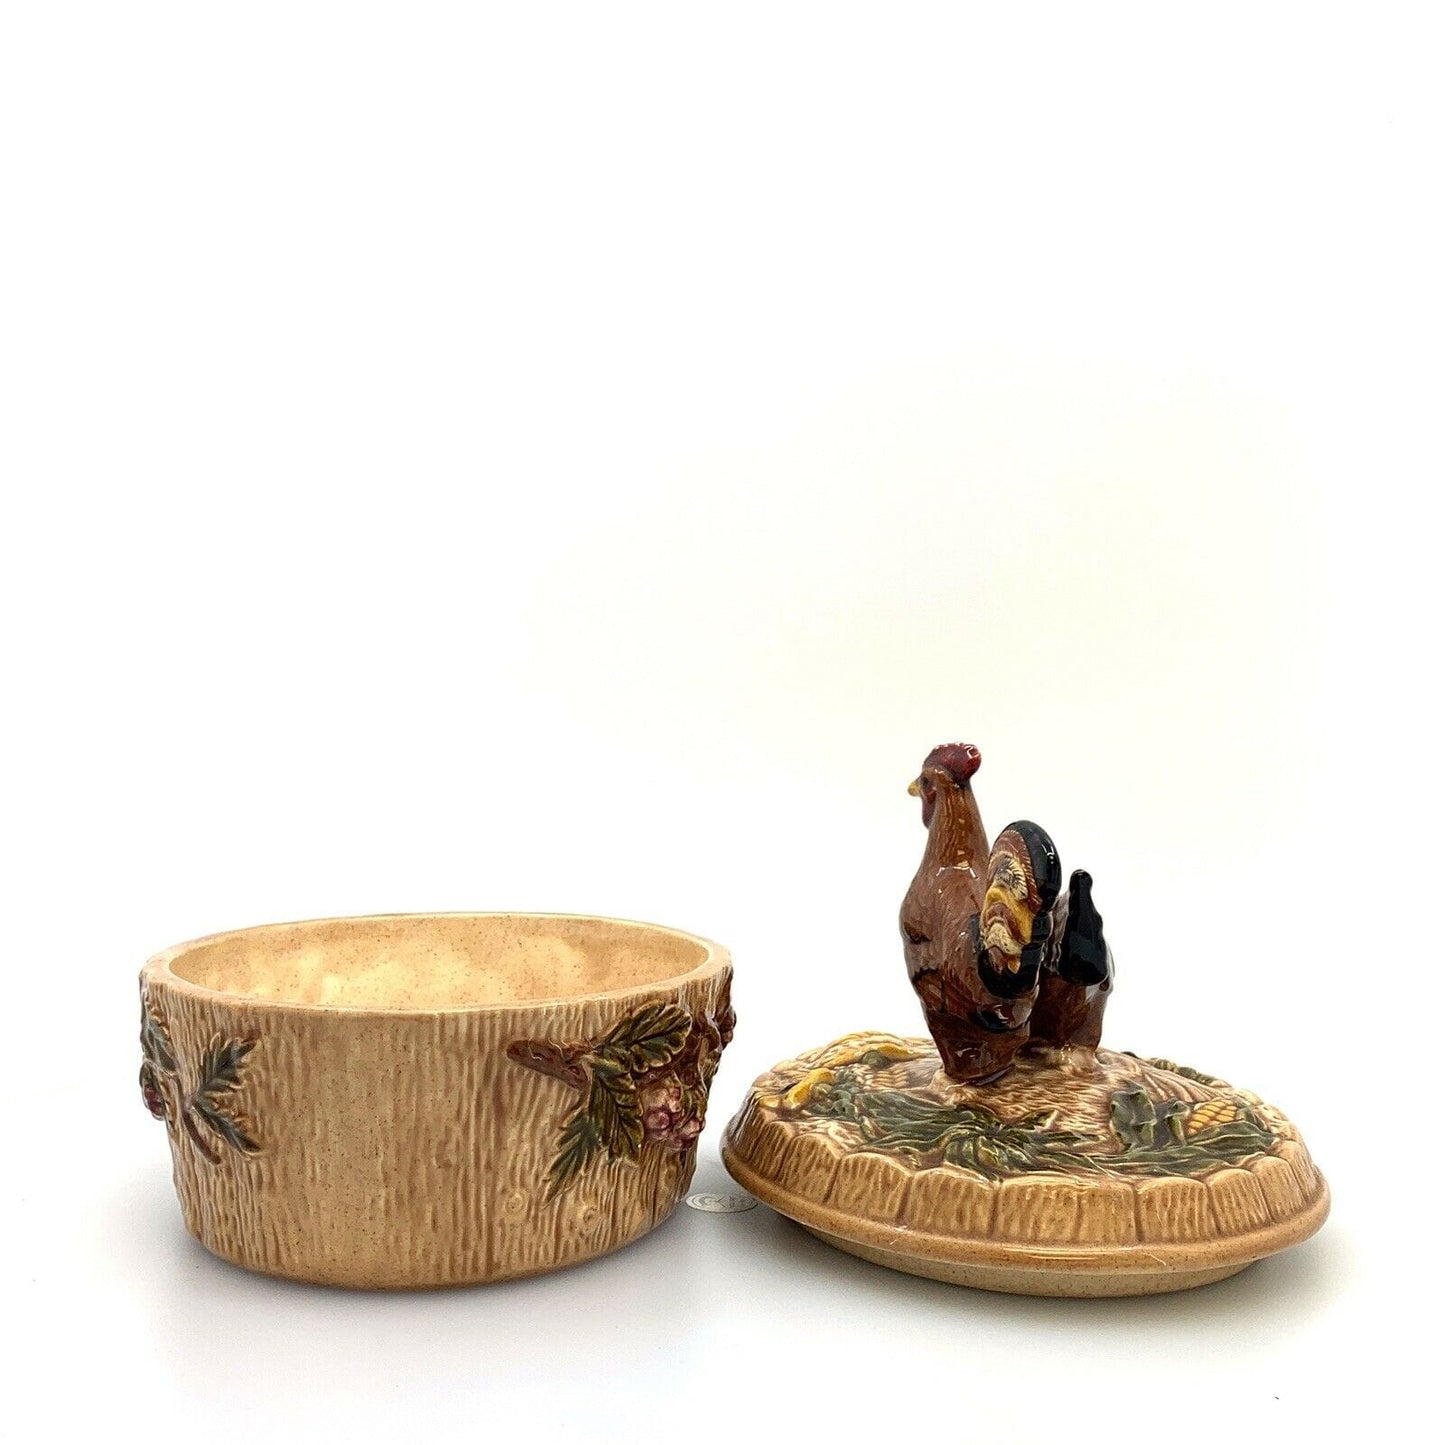 Hand Made Earthenware Rooster Candy Dish With Lid - Clarice